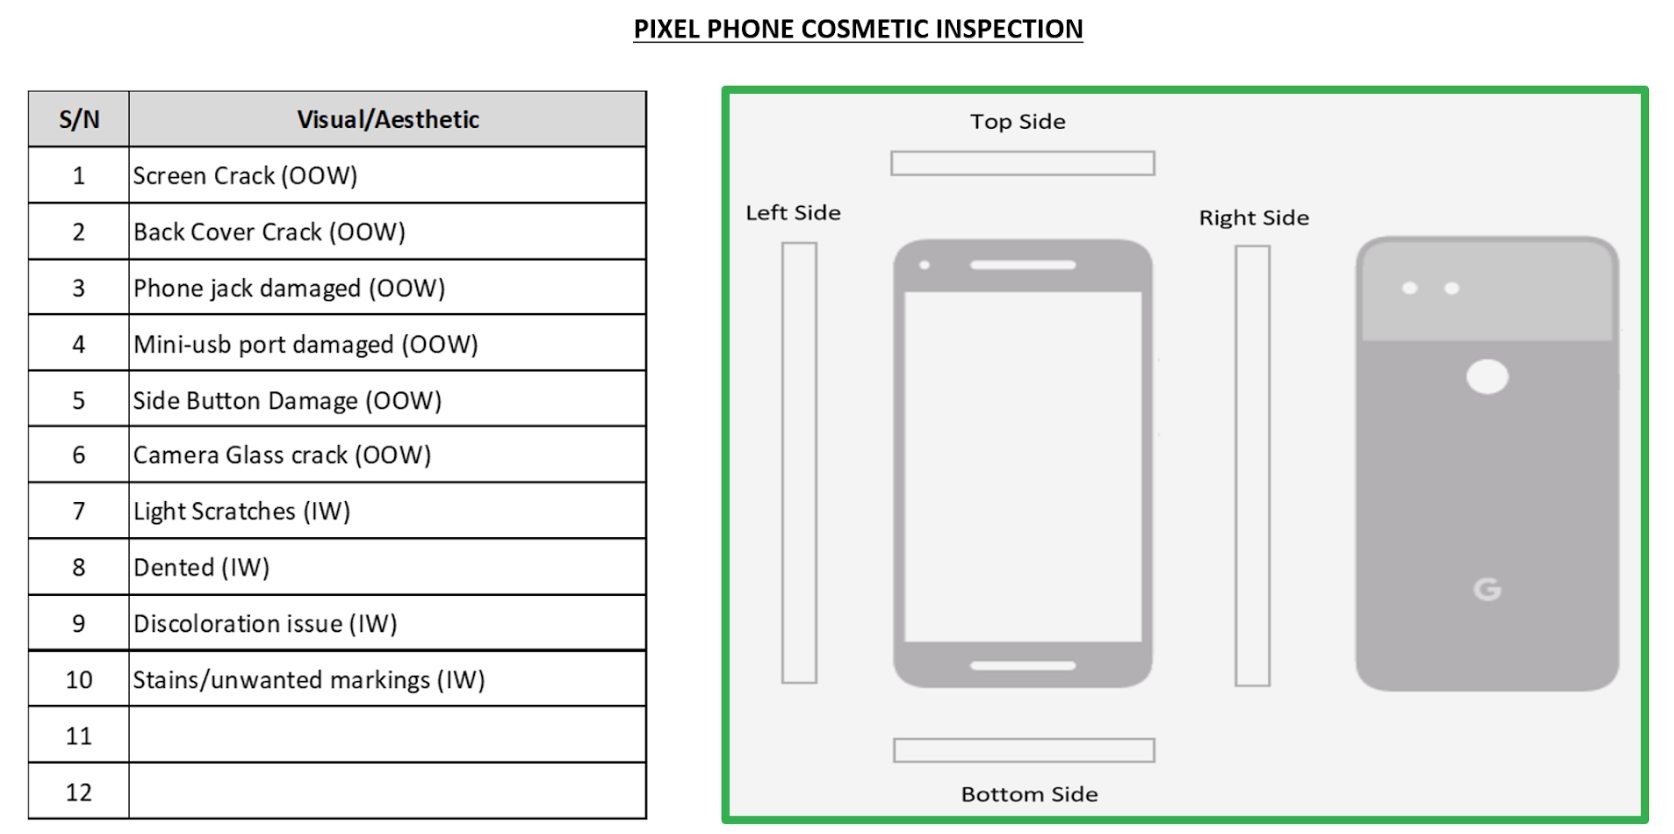 Visual and aesthetic checklist for phone inspection